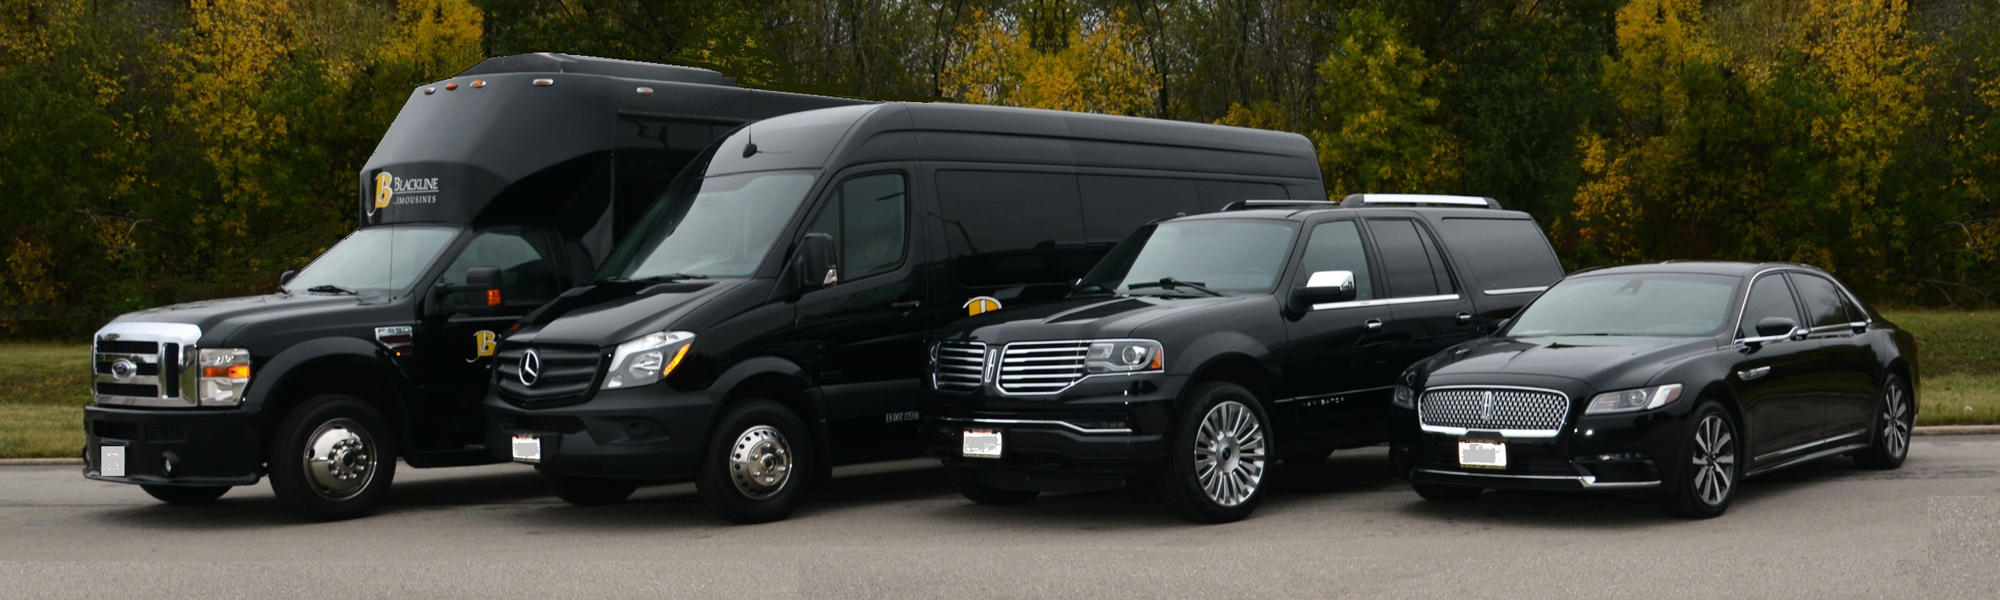 Car Service in Boston - Logan 247, Moe's Limousine, and MetroWest